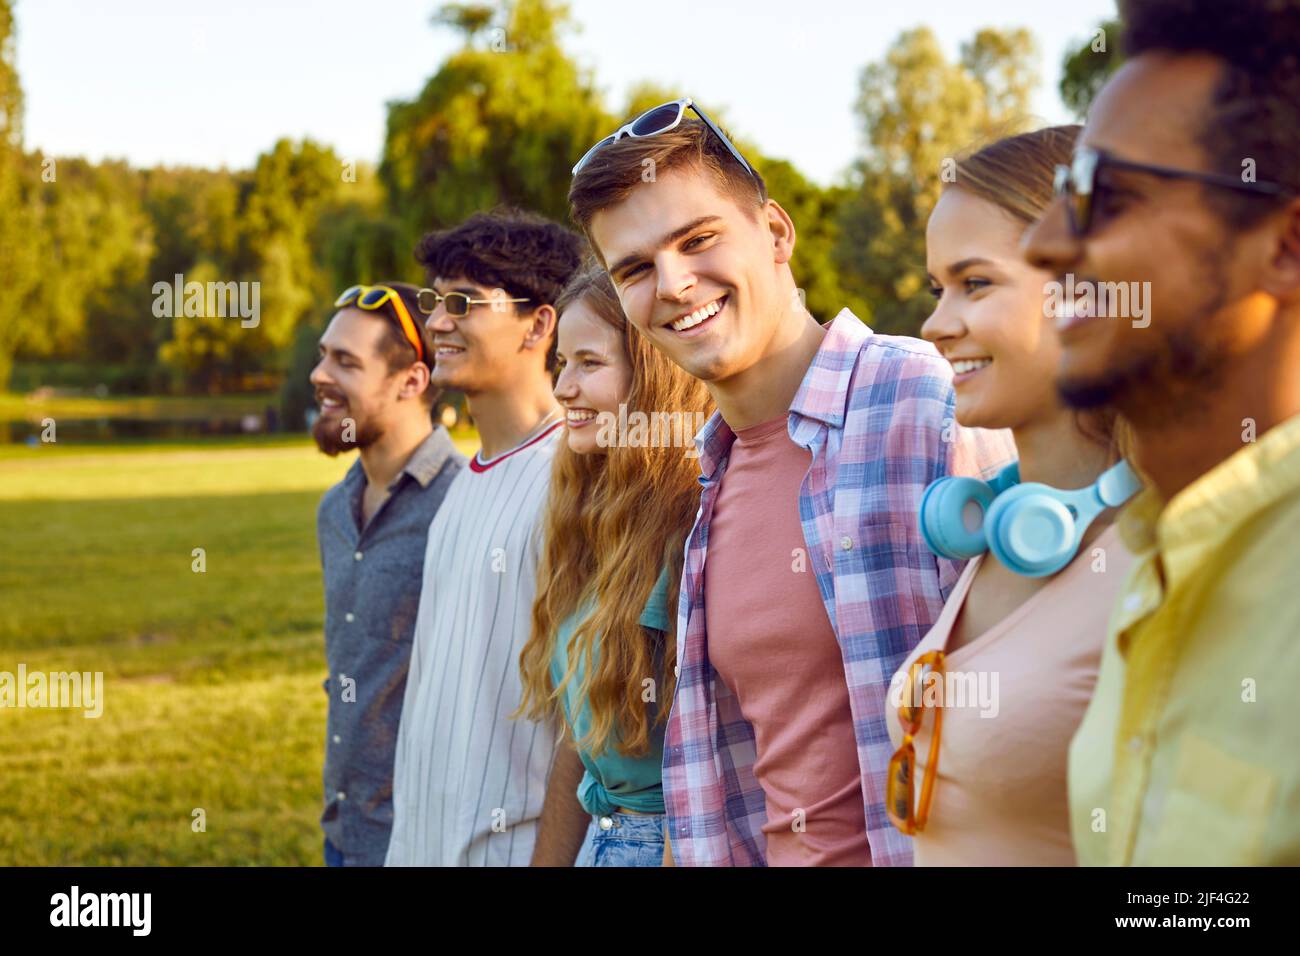 Portrait of joyful young man standing with his friends hanging out in public park. Stock Photo